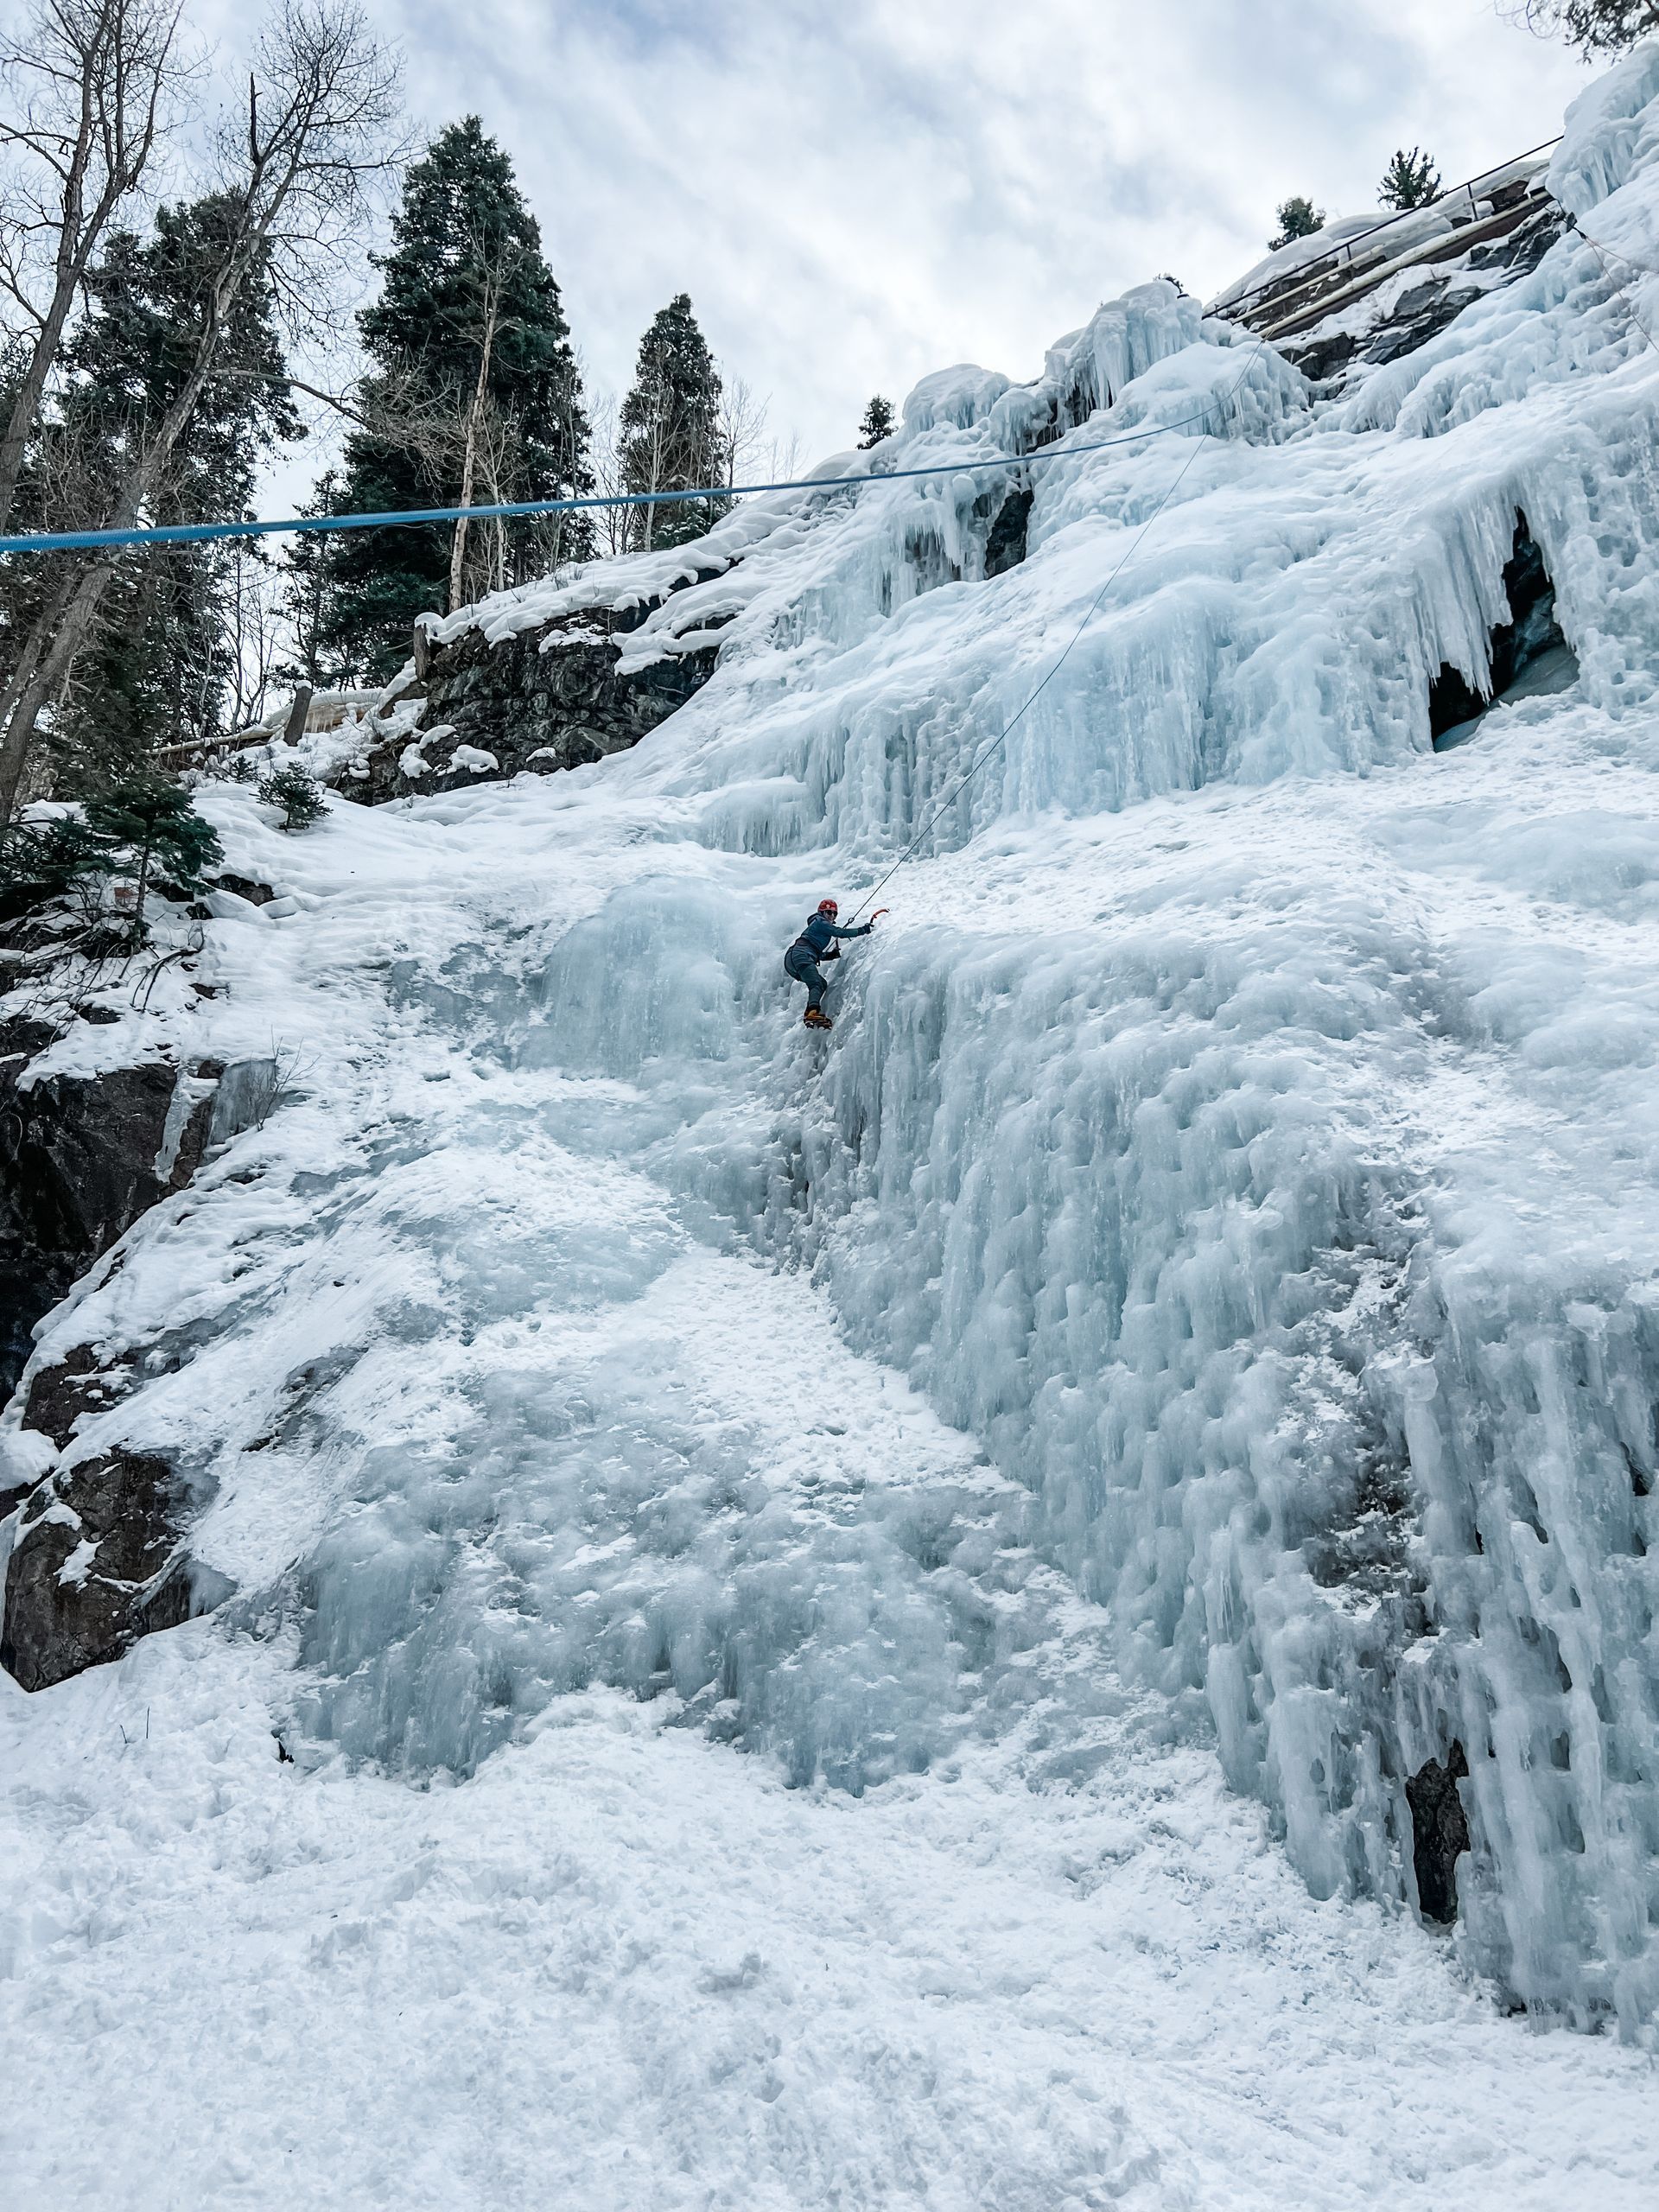 Presley ice climbing at Ouray Ice Park